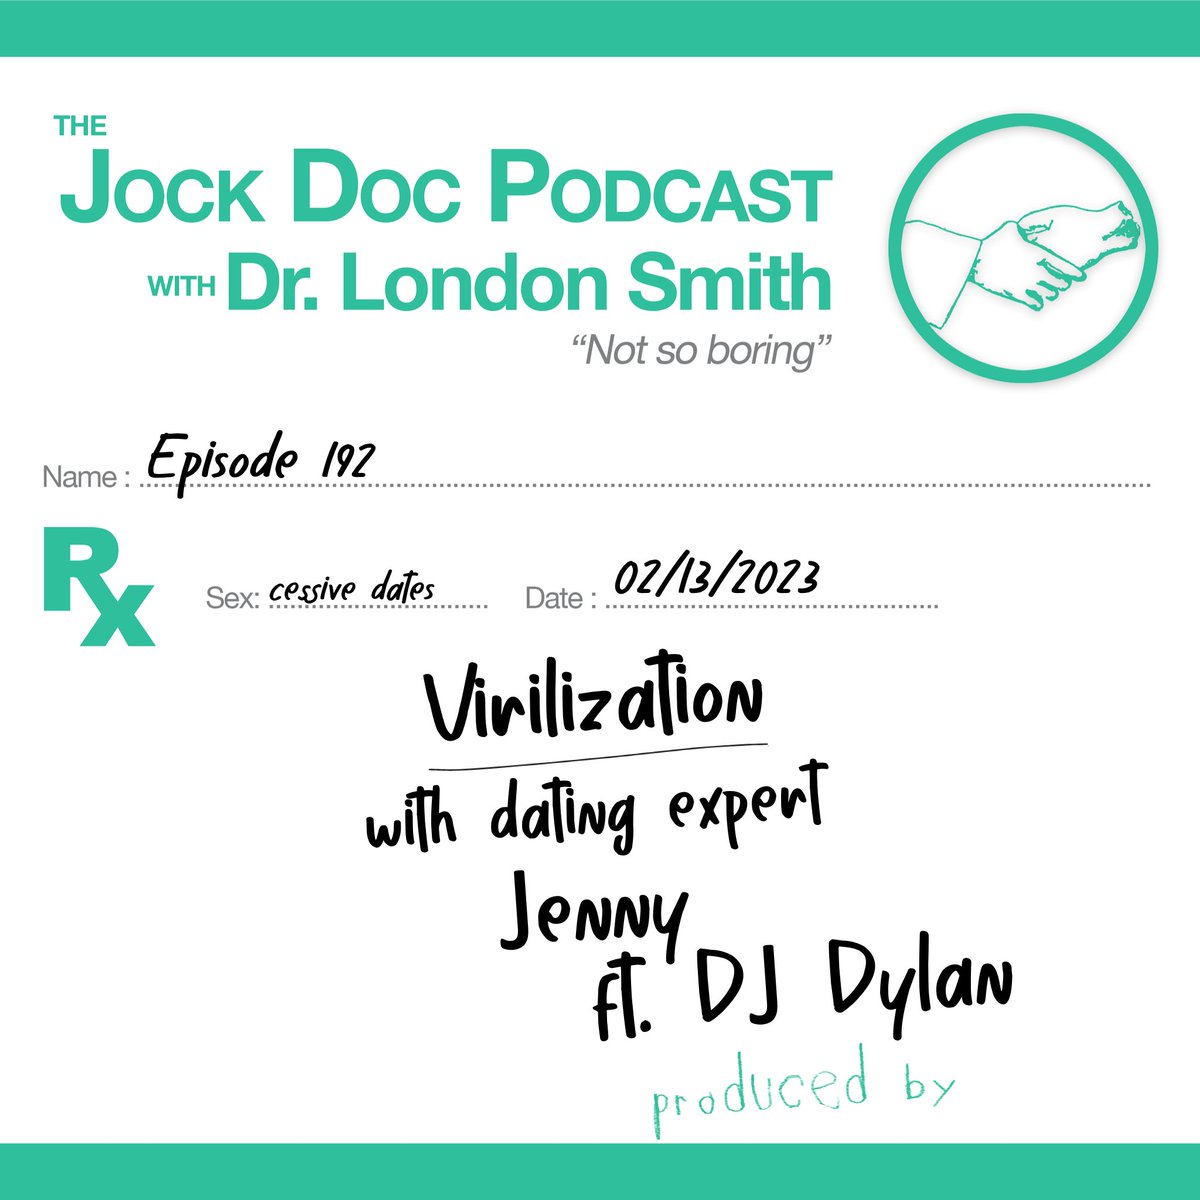 Listen as Dr. London Smith (.com) and his producer Cameron discuss Virilization with dating expert Jenny (@Chase_ODonnell whose standup special is at linktr.ee/chase_odonnell ). Not so boring! JockDocPodcast.com #comedy #podcast #endocrinology #Virilization #DatingExpert